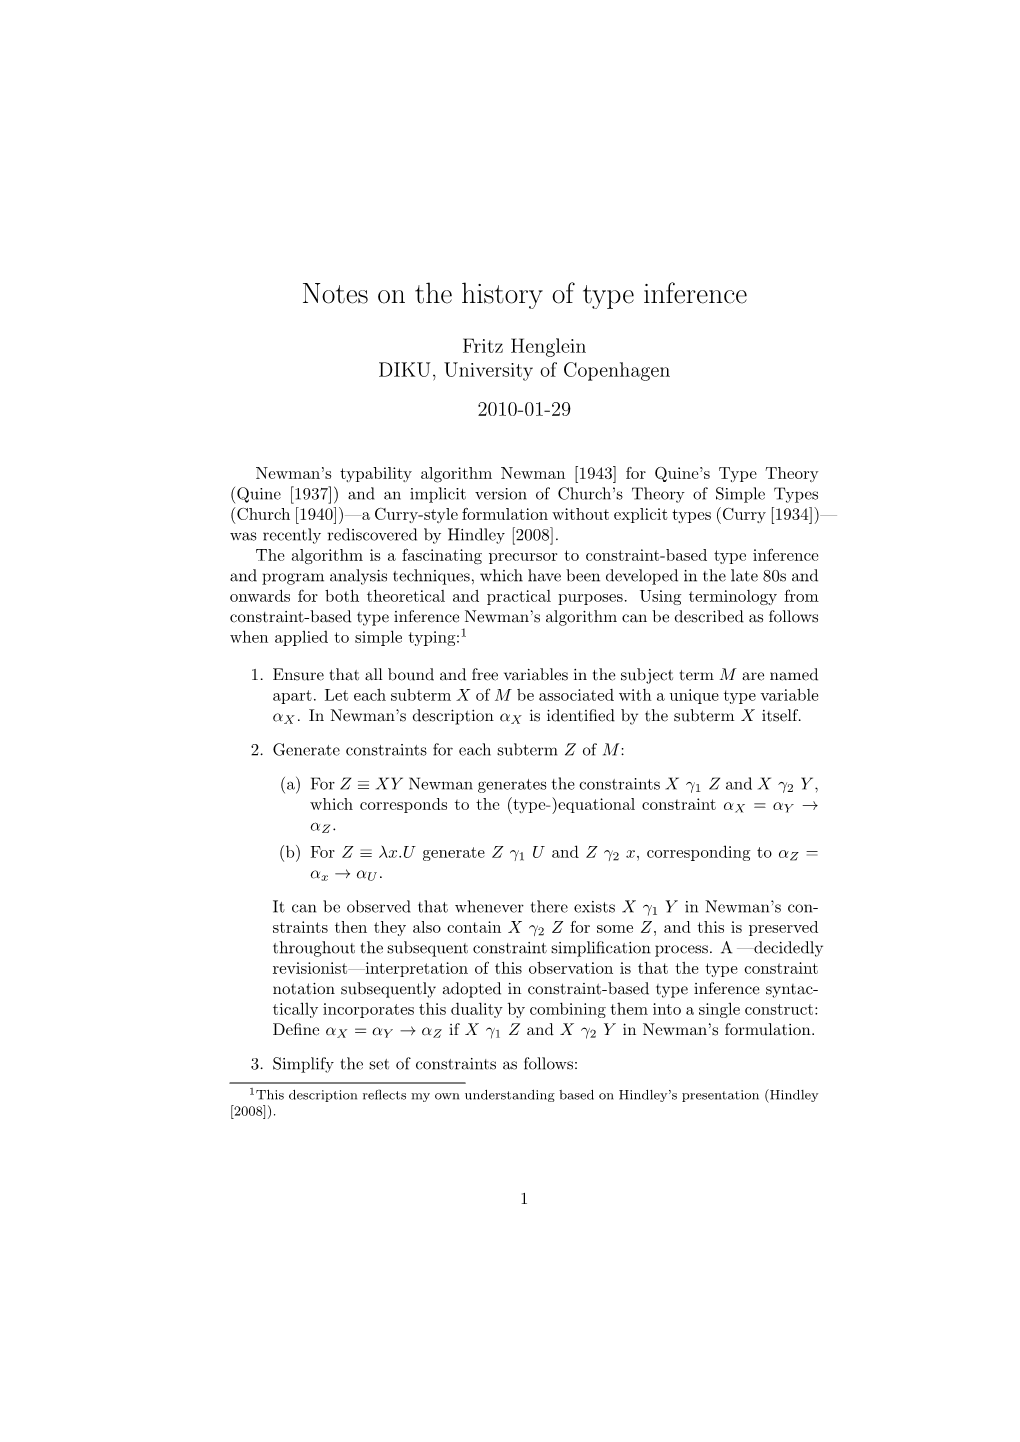 Notes on the History of Type Inference